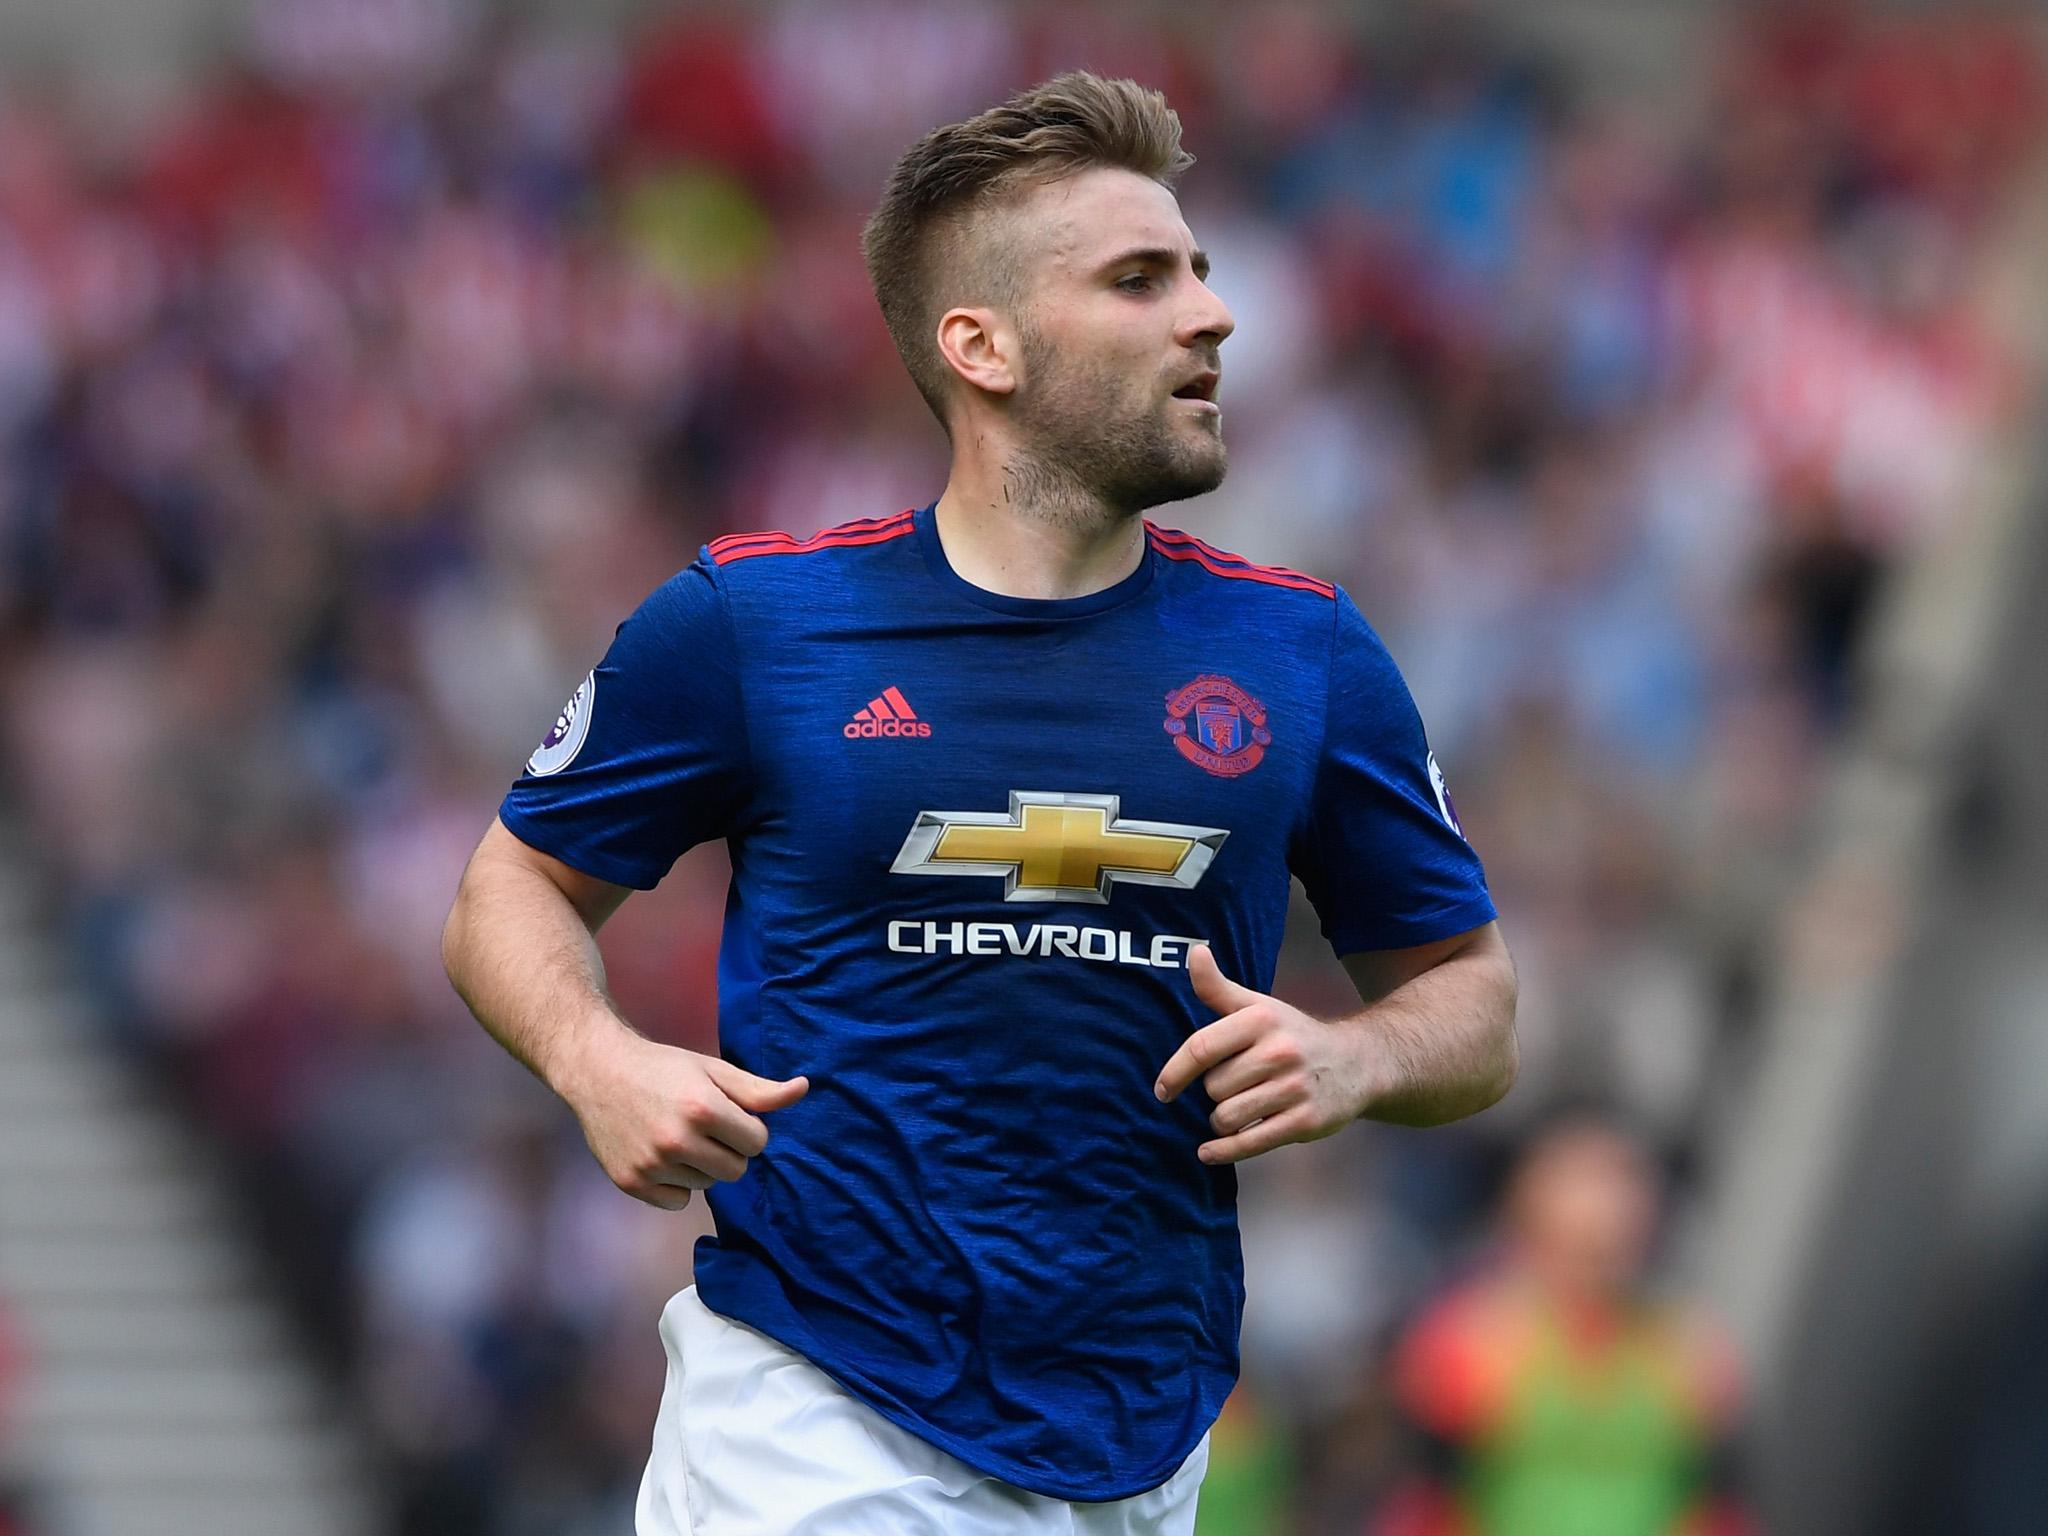 Shaw has been overlooked by Mourinho this season